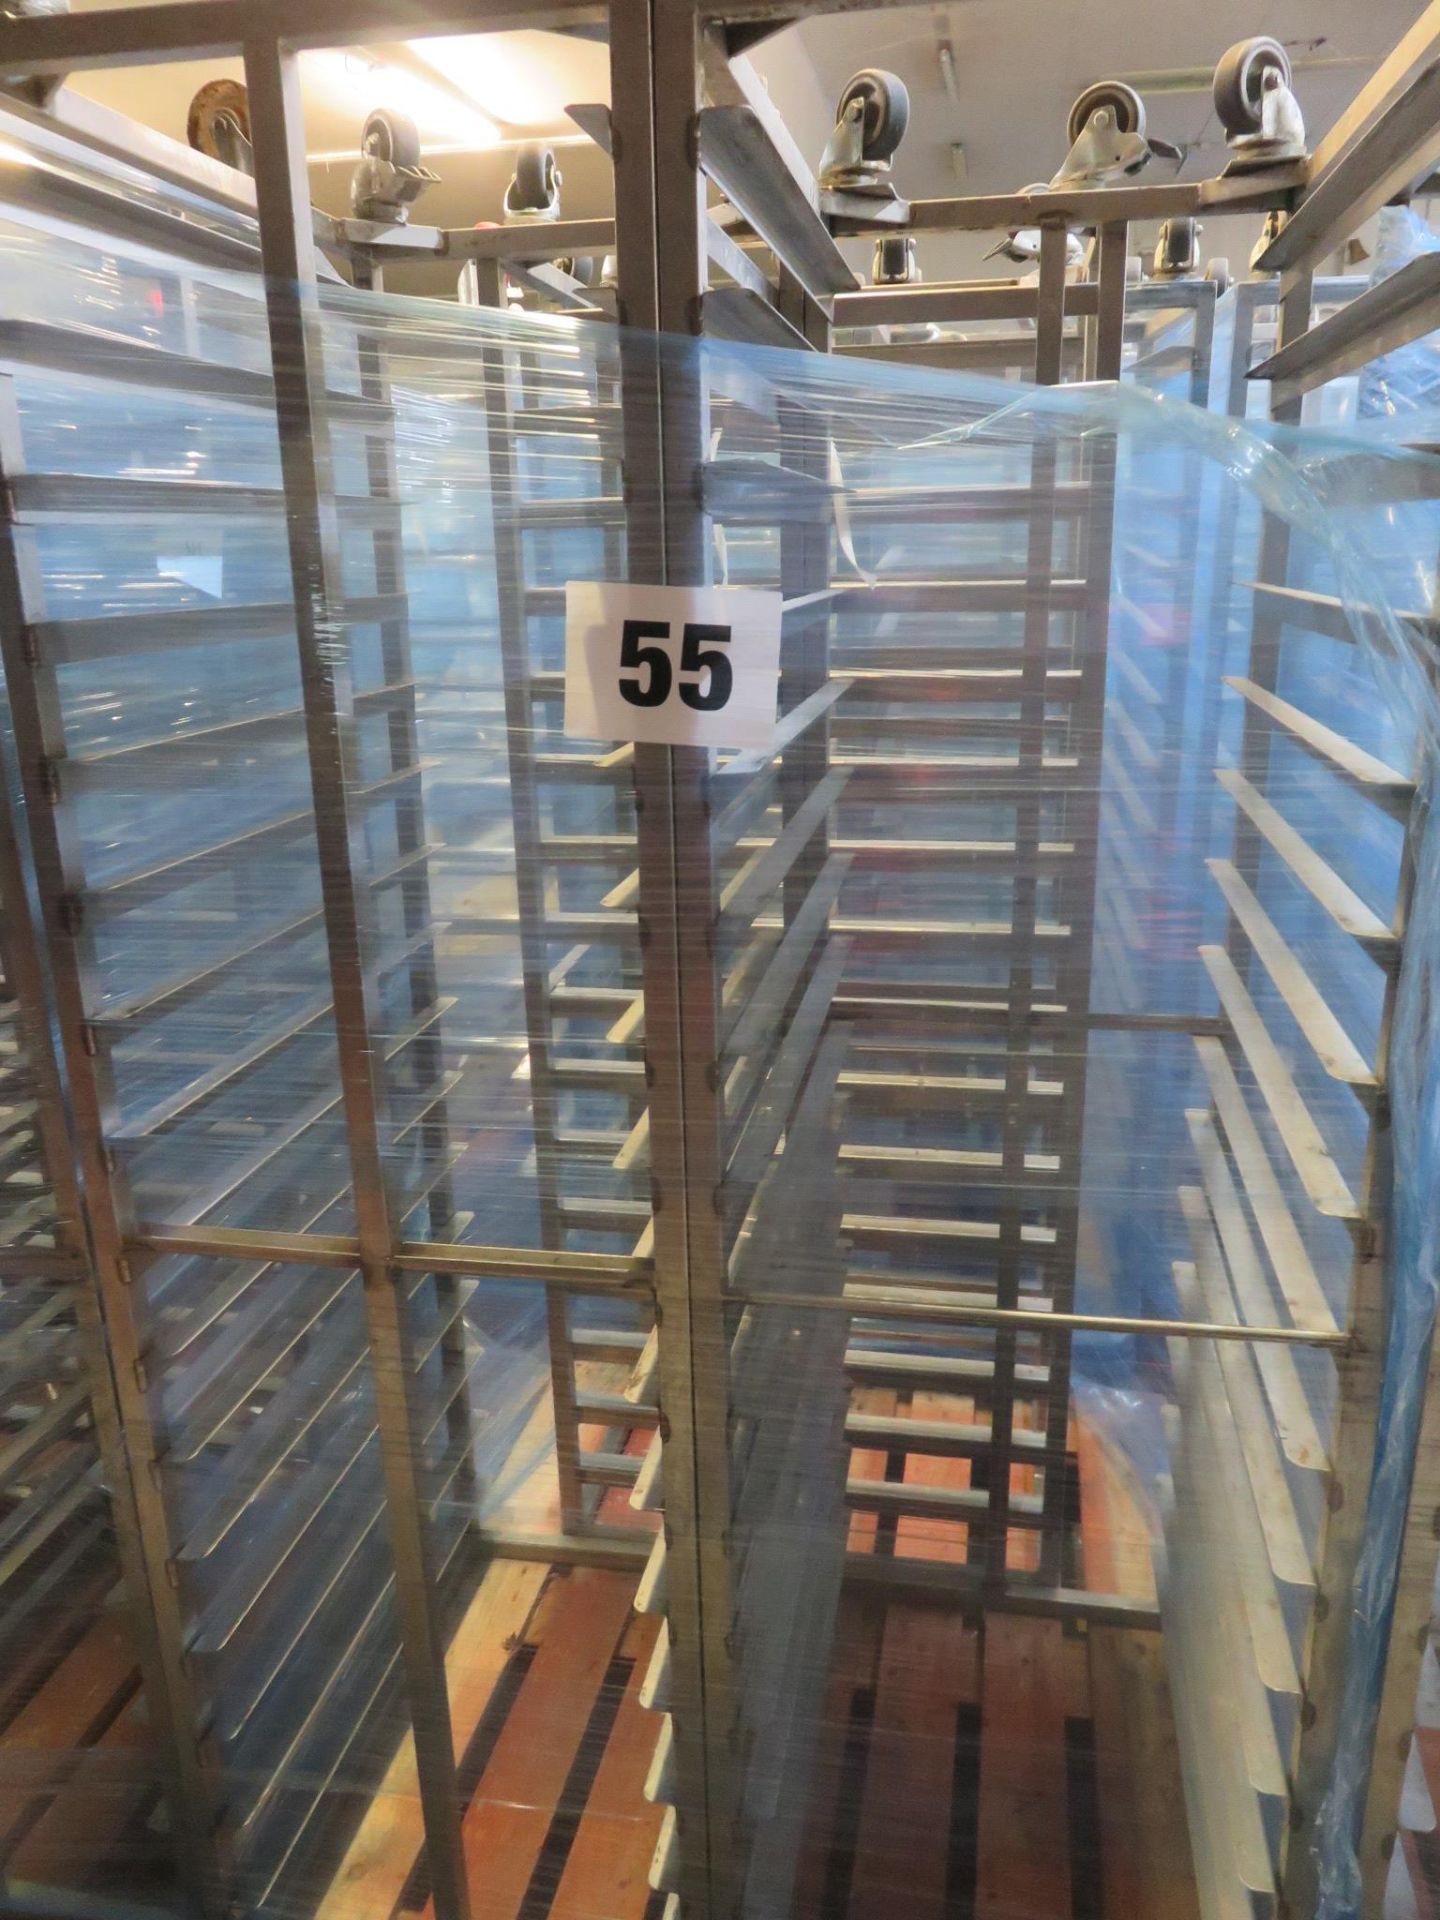 3 x S/s Racks capable of taking 16 trays. Approx.430 x 650 x 1800mm high. Mobile. LO £30